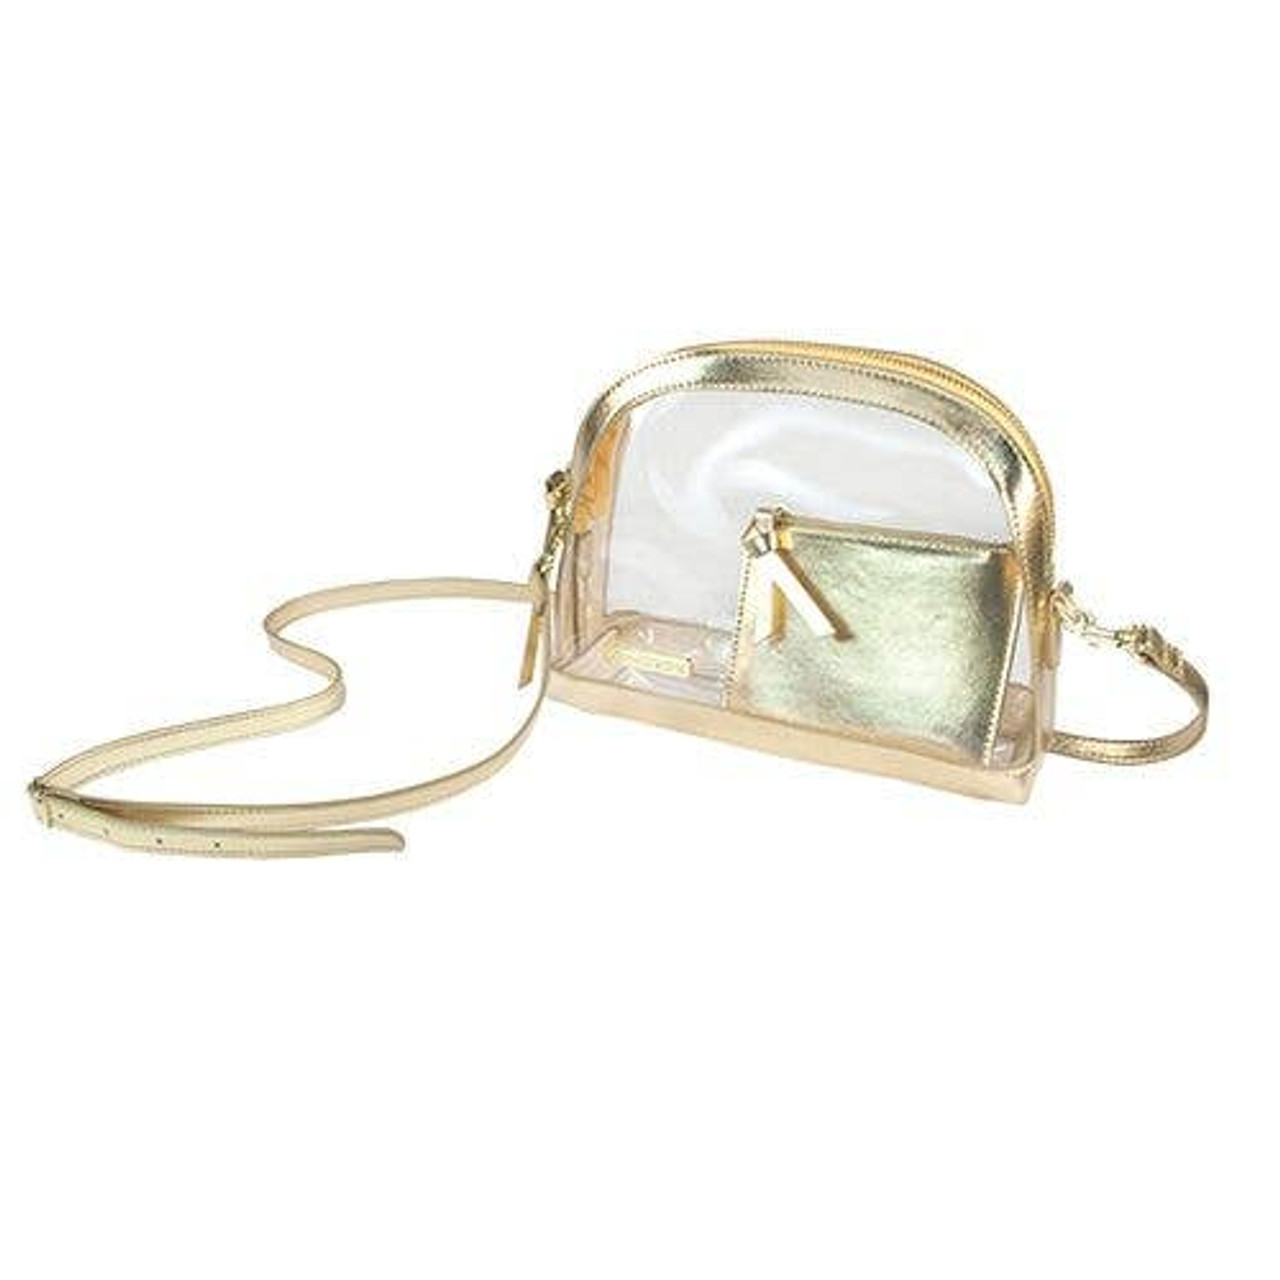 CLEAR STADIUM BAG WITH GOLD HANDLES